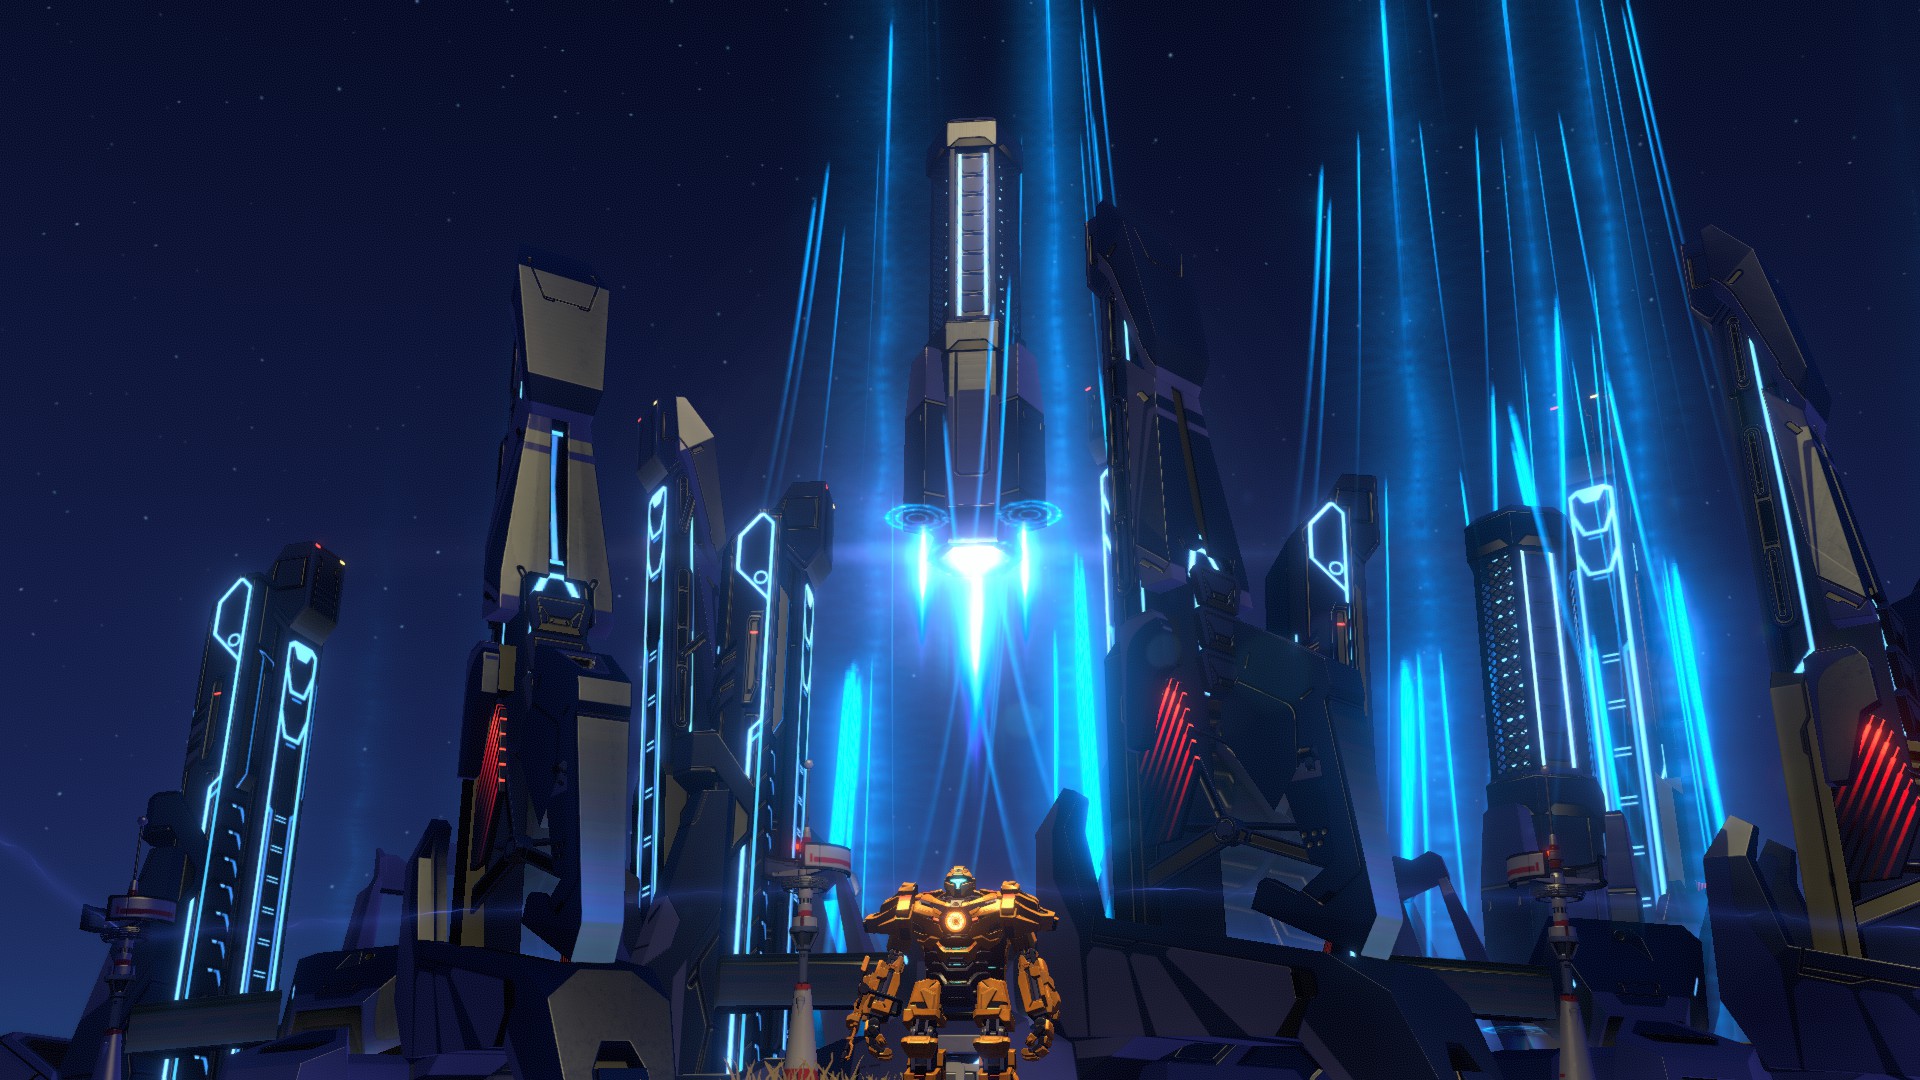 Dyson Sphere Program screenshot showing the mecha in front of several rocket silos